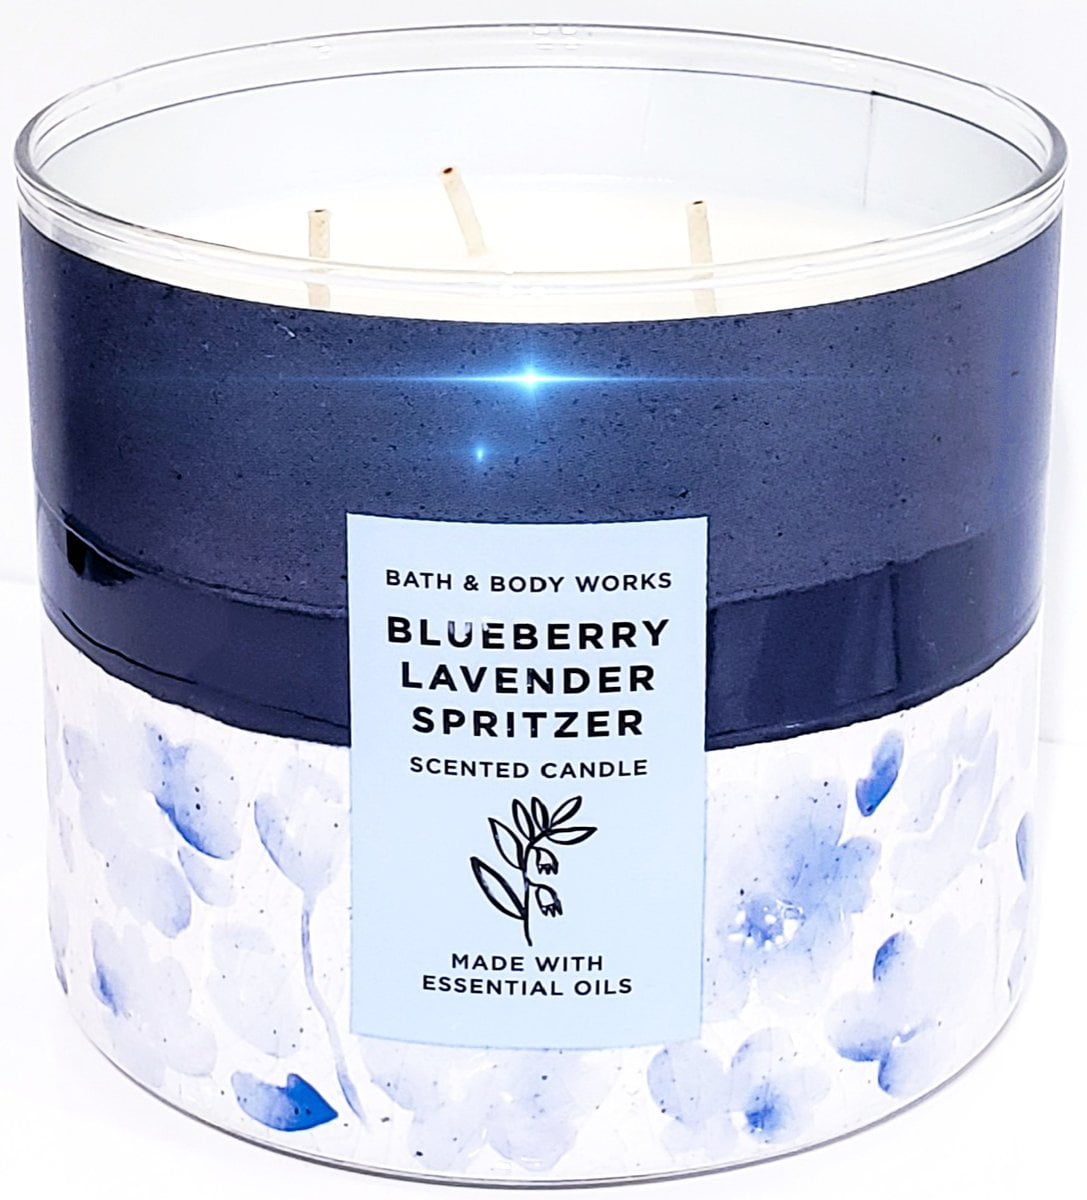 Bath & Body Works Blueberry Pie Large Scented 3 Wick Candle 14.5 oz White Barn 